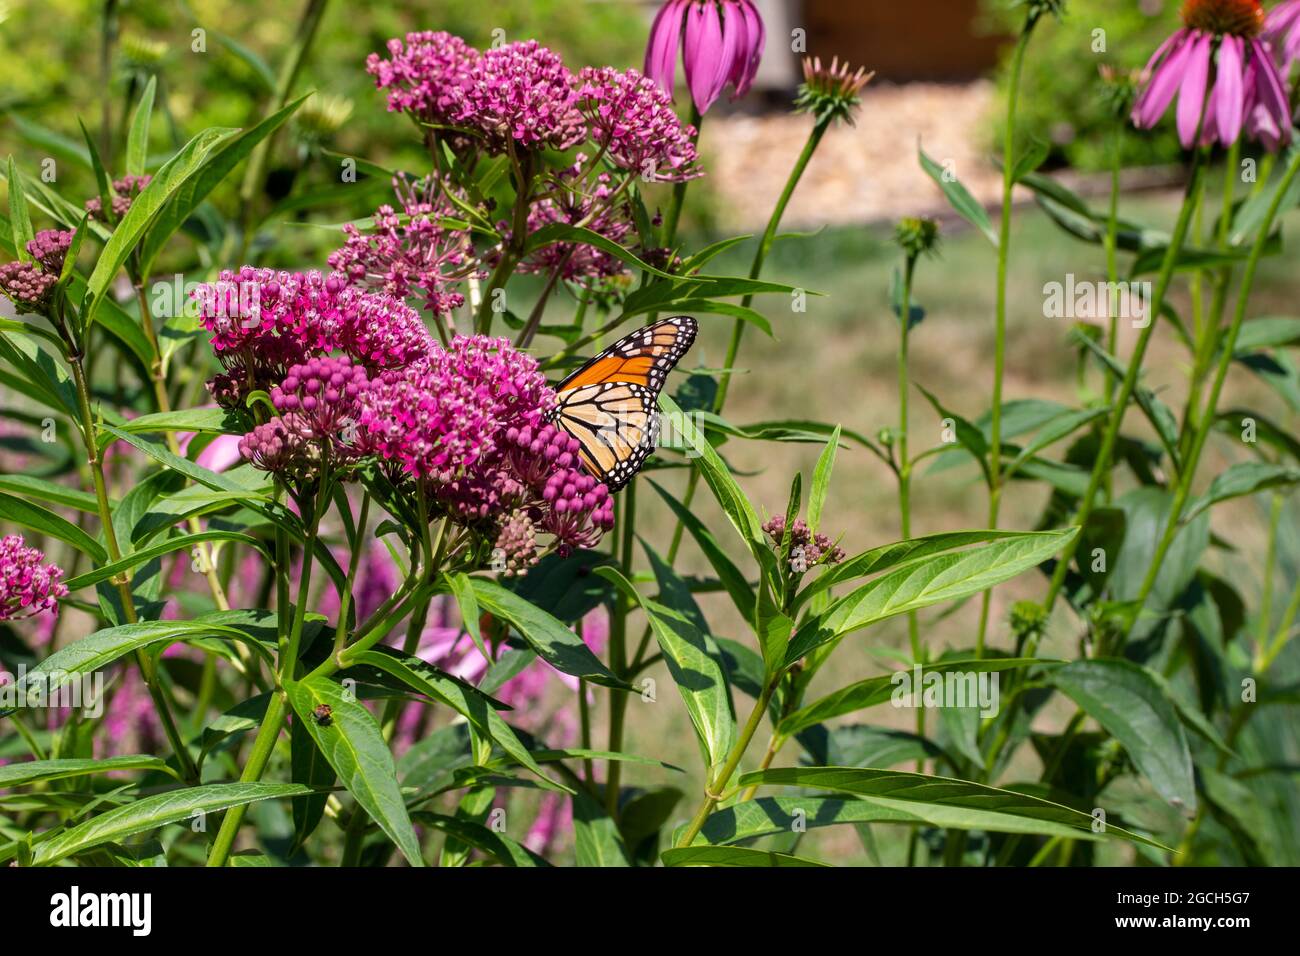 Monarch butterfly feeding on the blossoms and buds of a swamp milkweed plant (asclepias incarnata) in a sunny garden Stock Photo